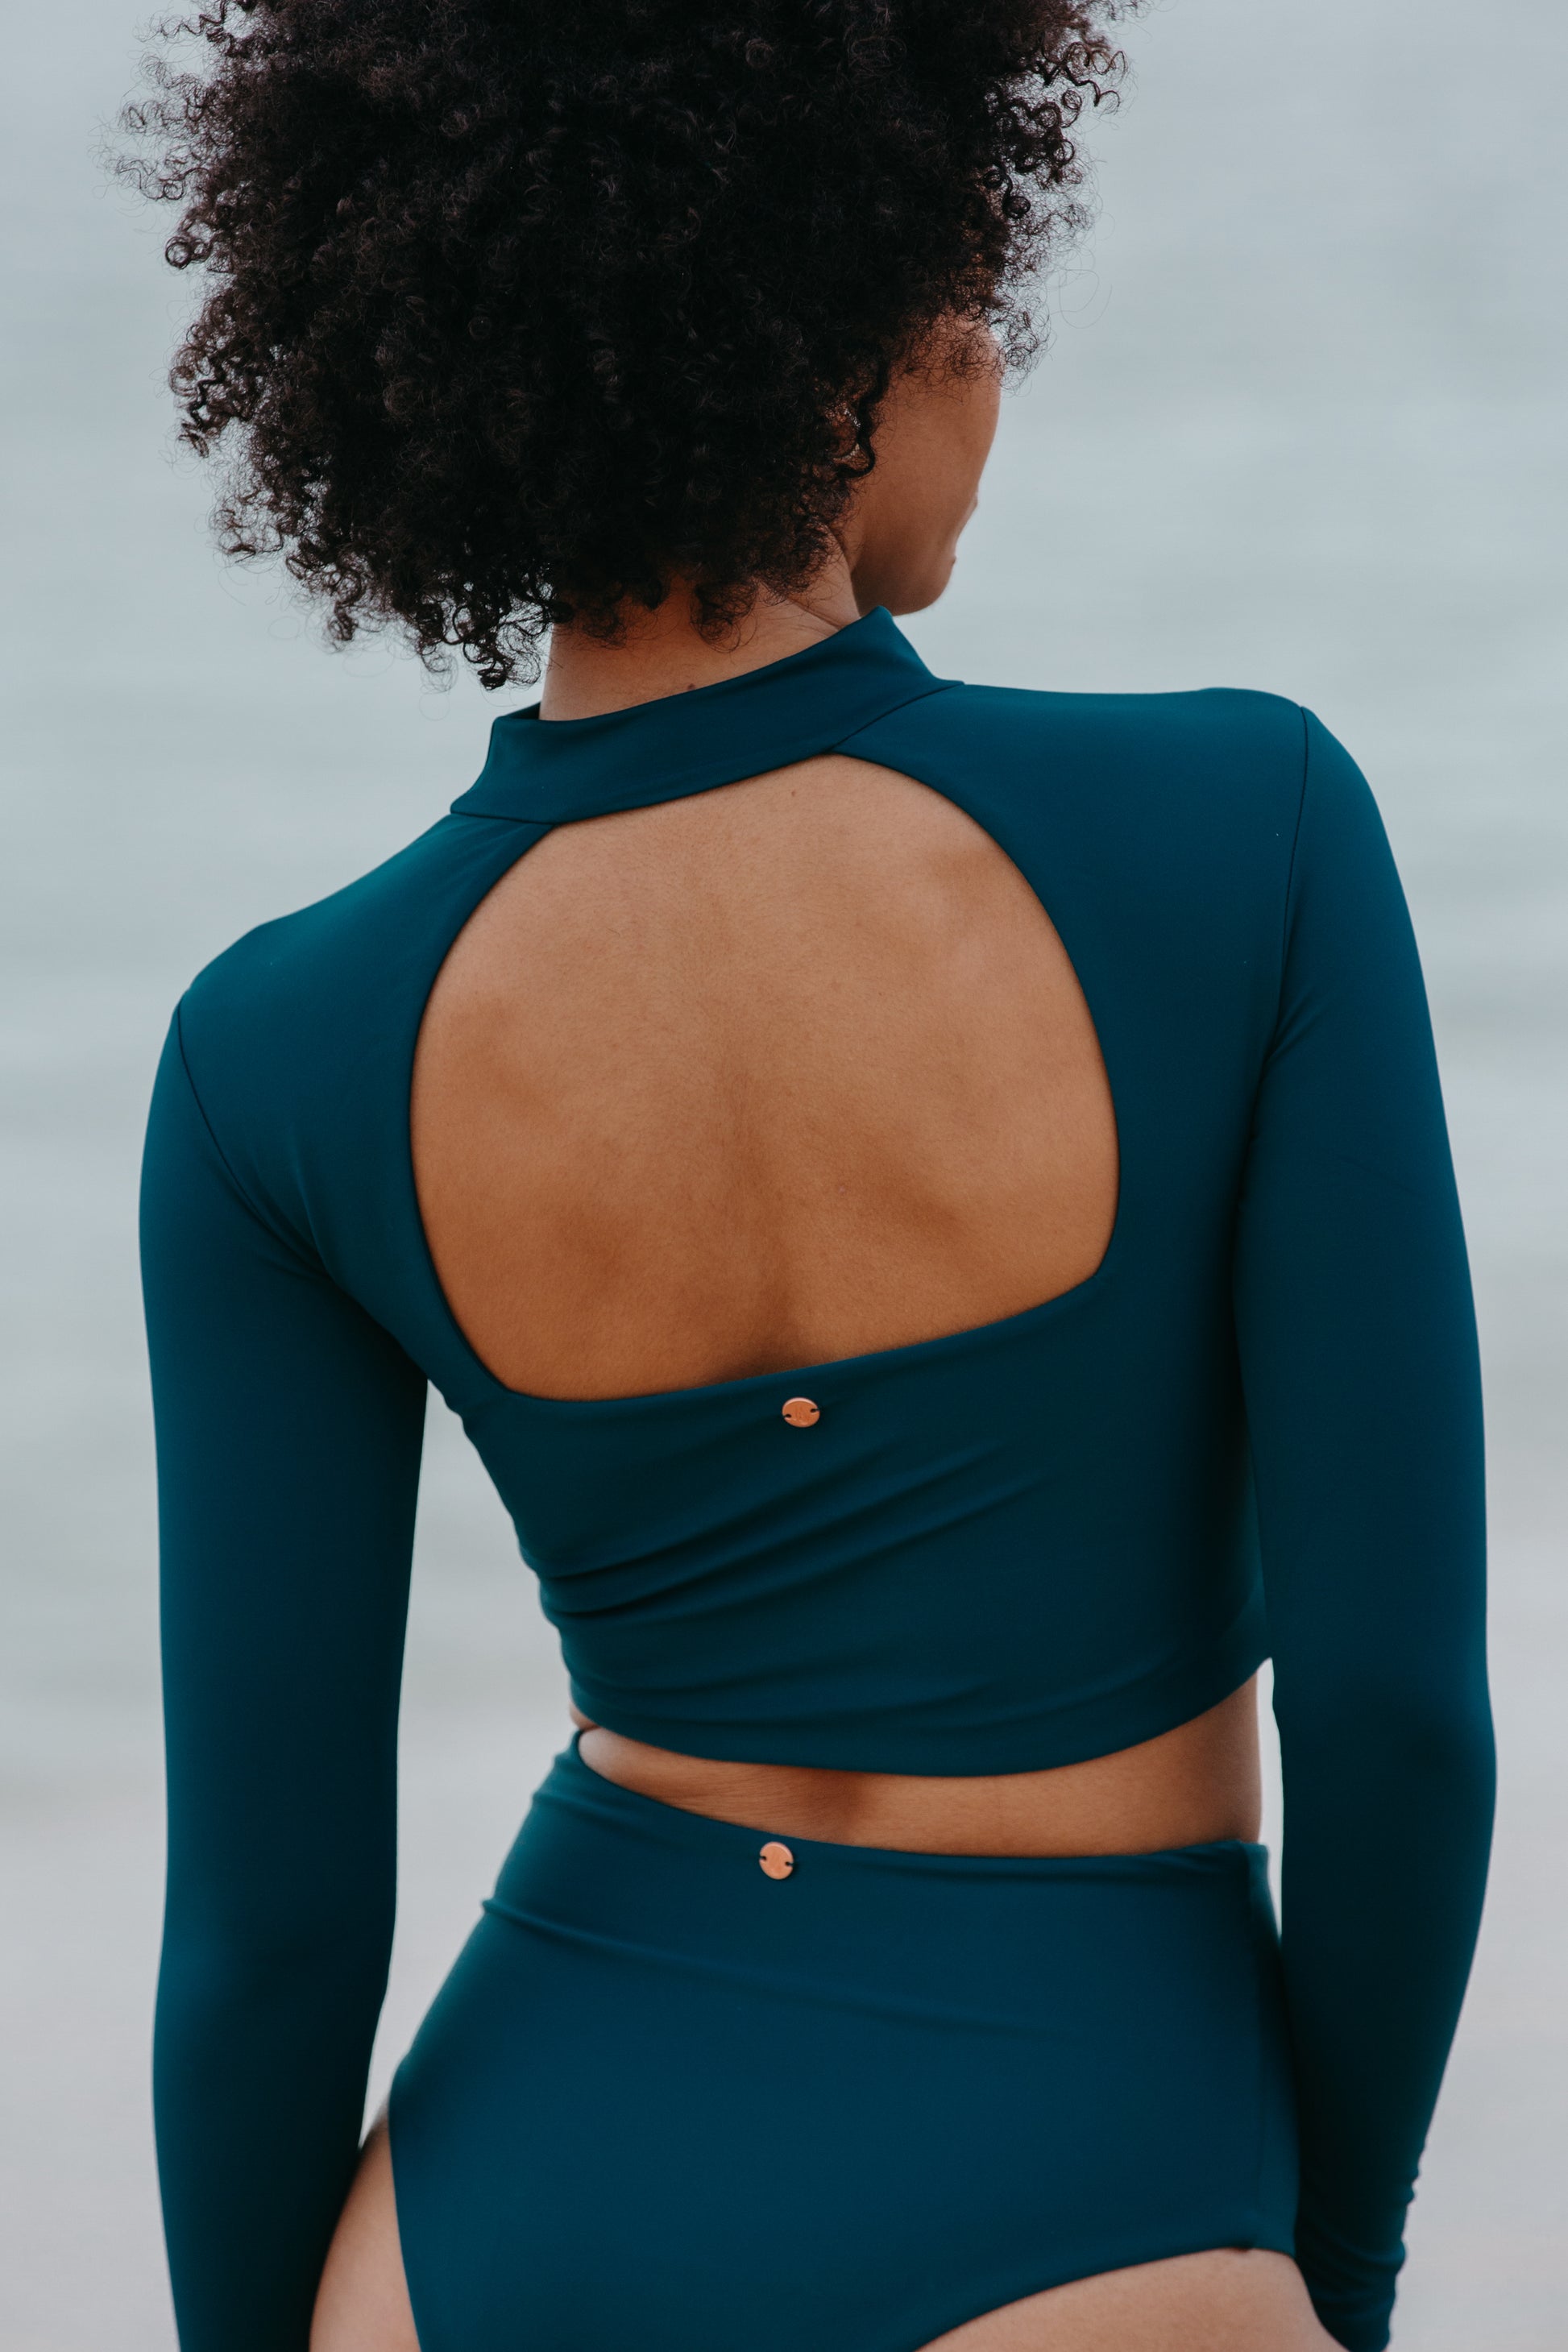 surf cropped top rashguard long sleeves swimsuit teal blue